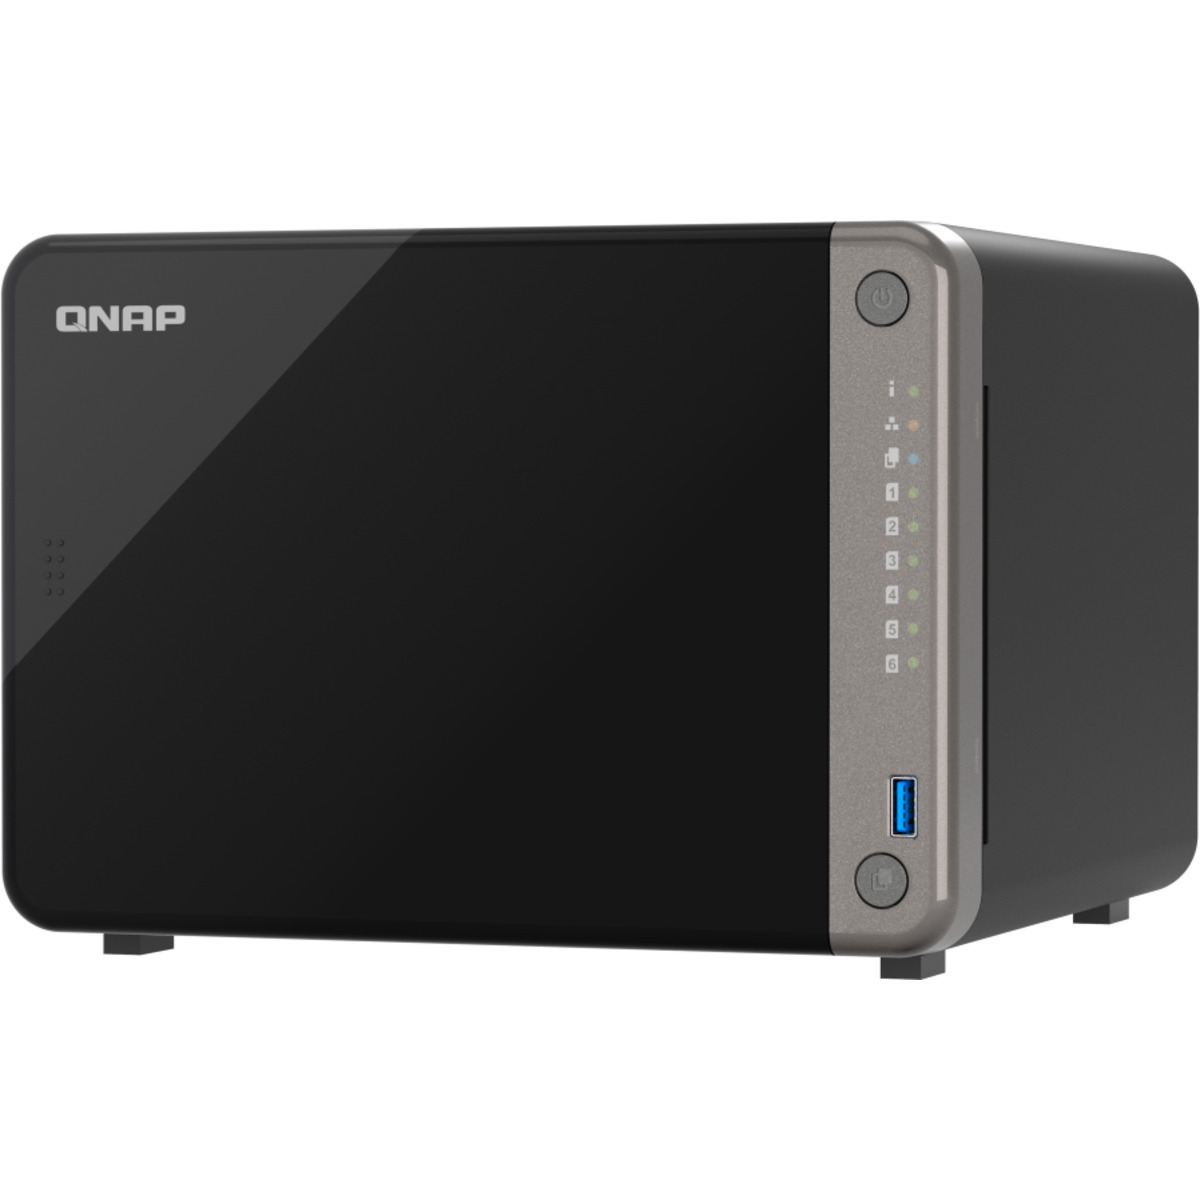 QNAP TS-AI642 20tb 6-Bay Desktop Multimedia / Power User / Business NAS - Network Attached Storage Device 5x4tb Western Digital Red Plus WD40EFPX 3.5 5400rpm SATA 6Gb/s HDD NAS Class Drives Installed - Burn-In Tested TS-AI642